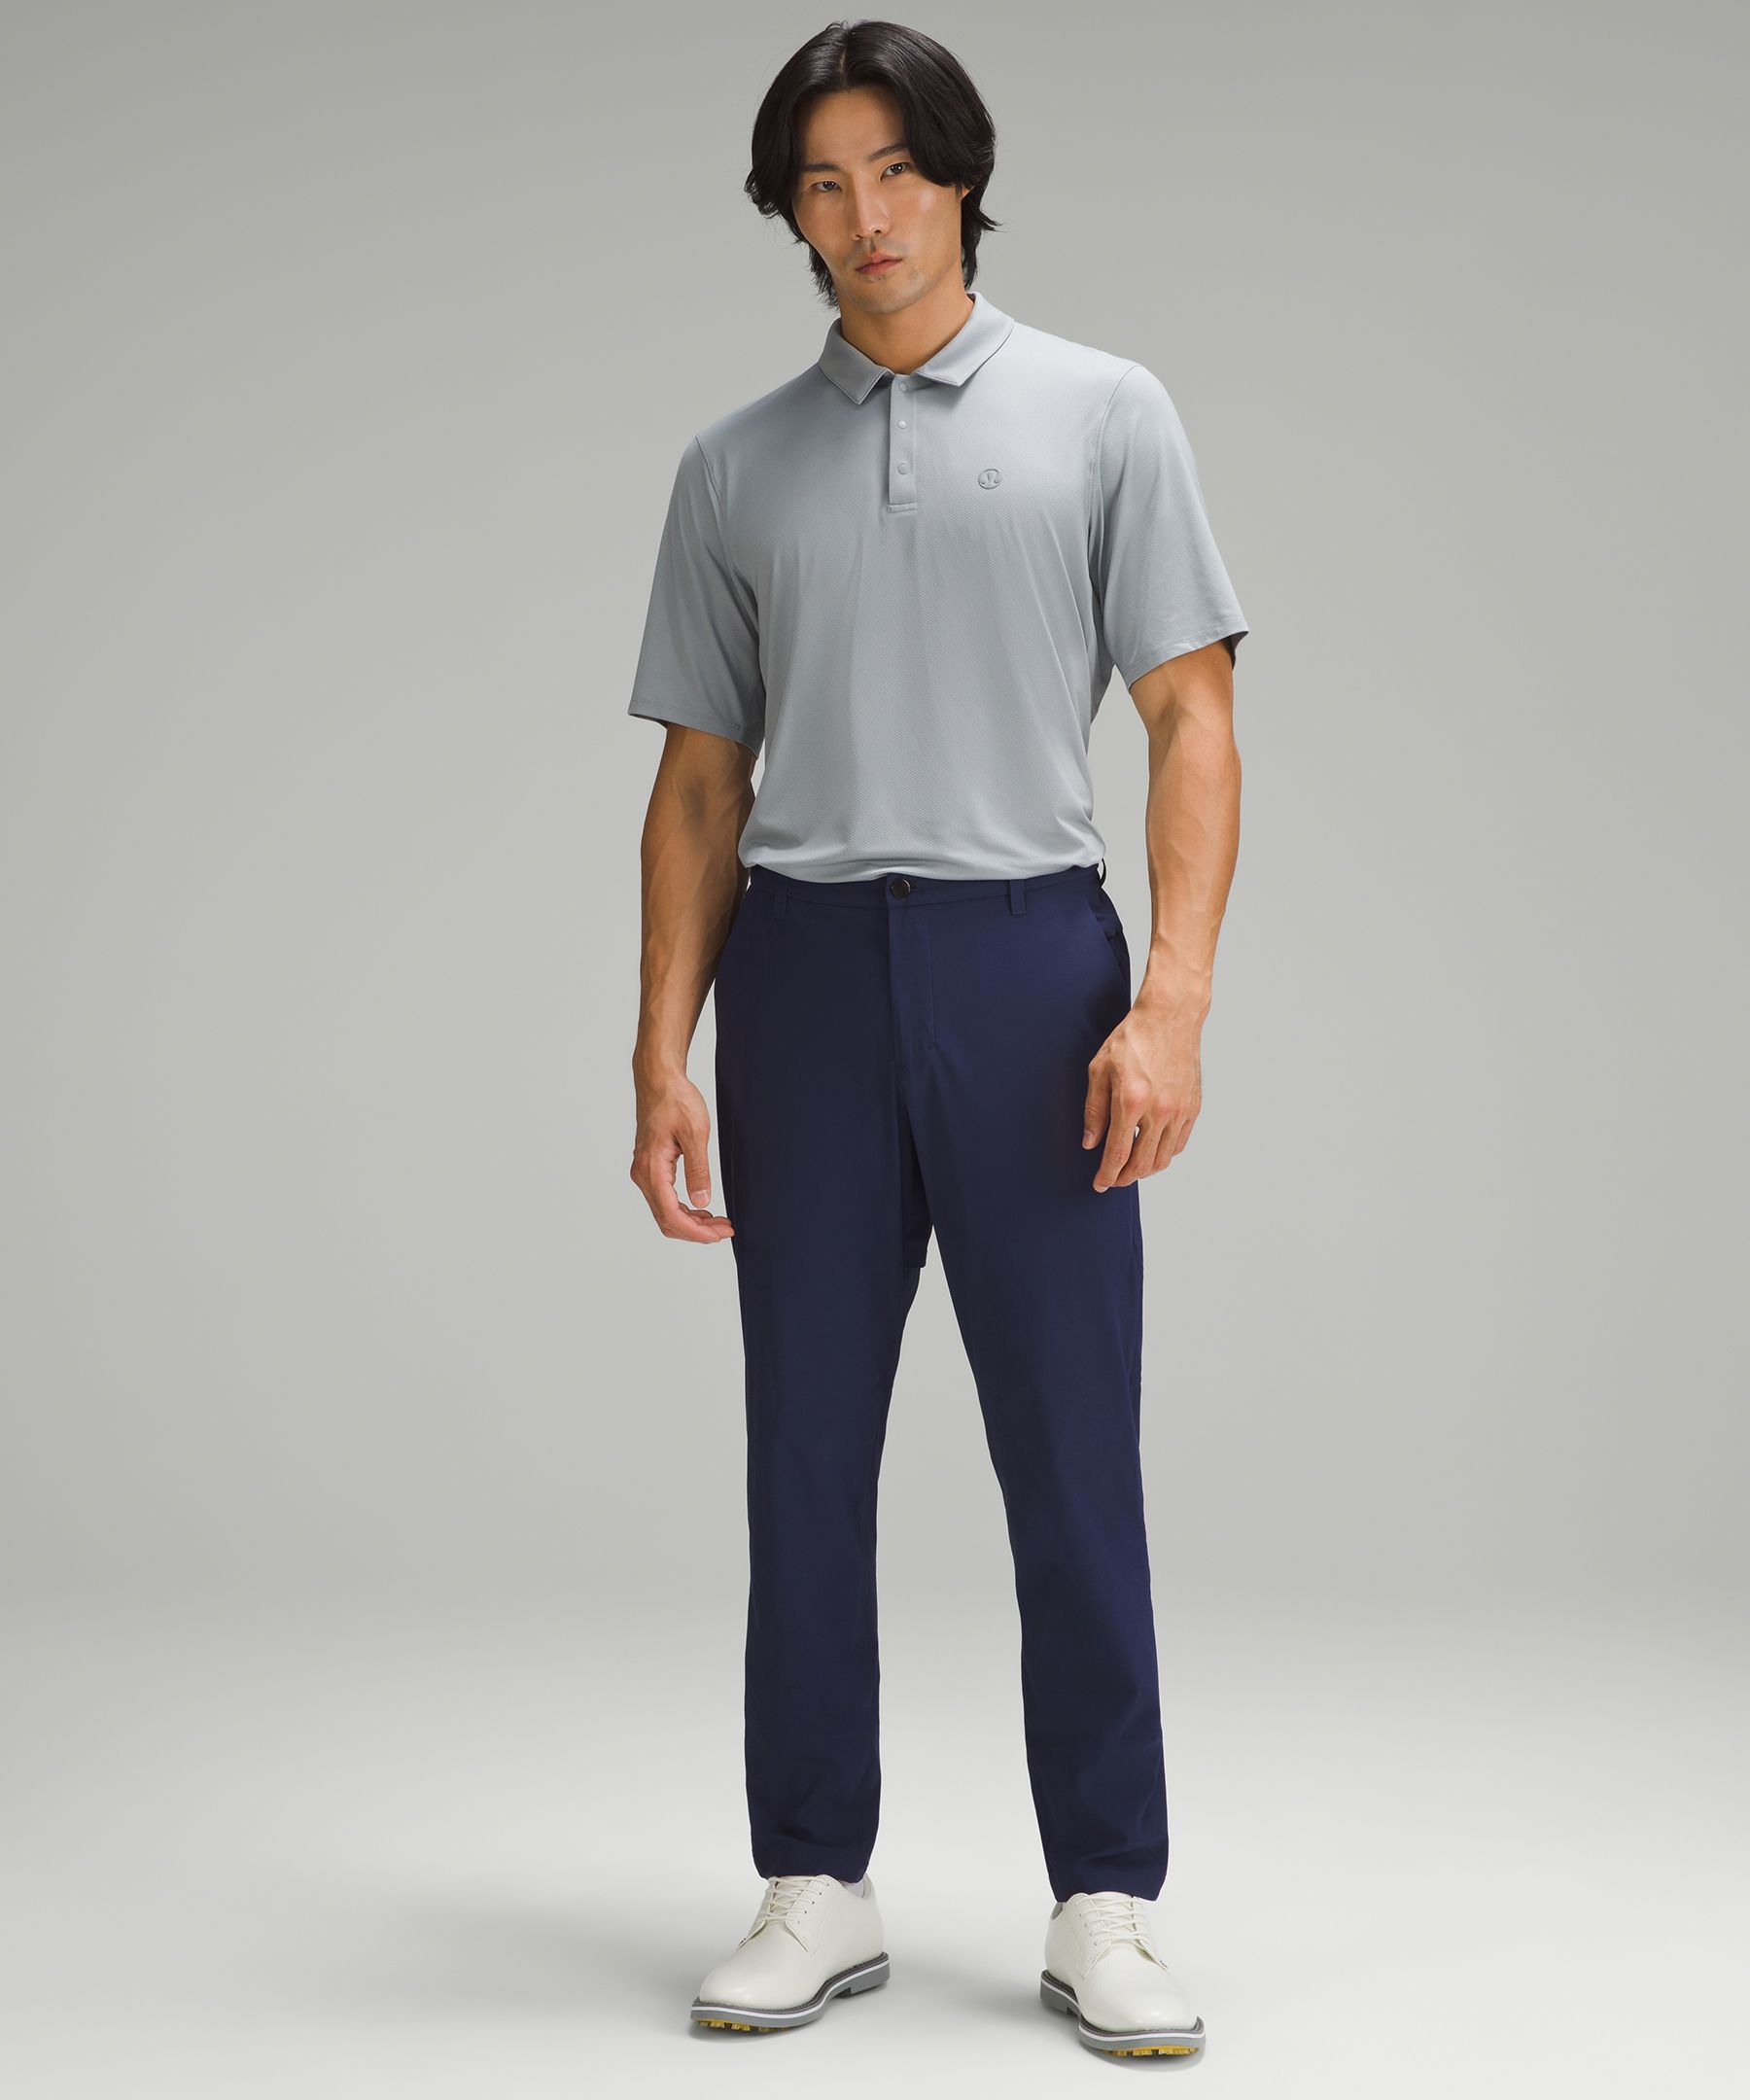 Stretch Nylon Classic-Tapered Golf Pant 34, Men's Trousers